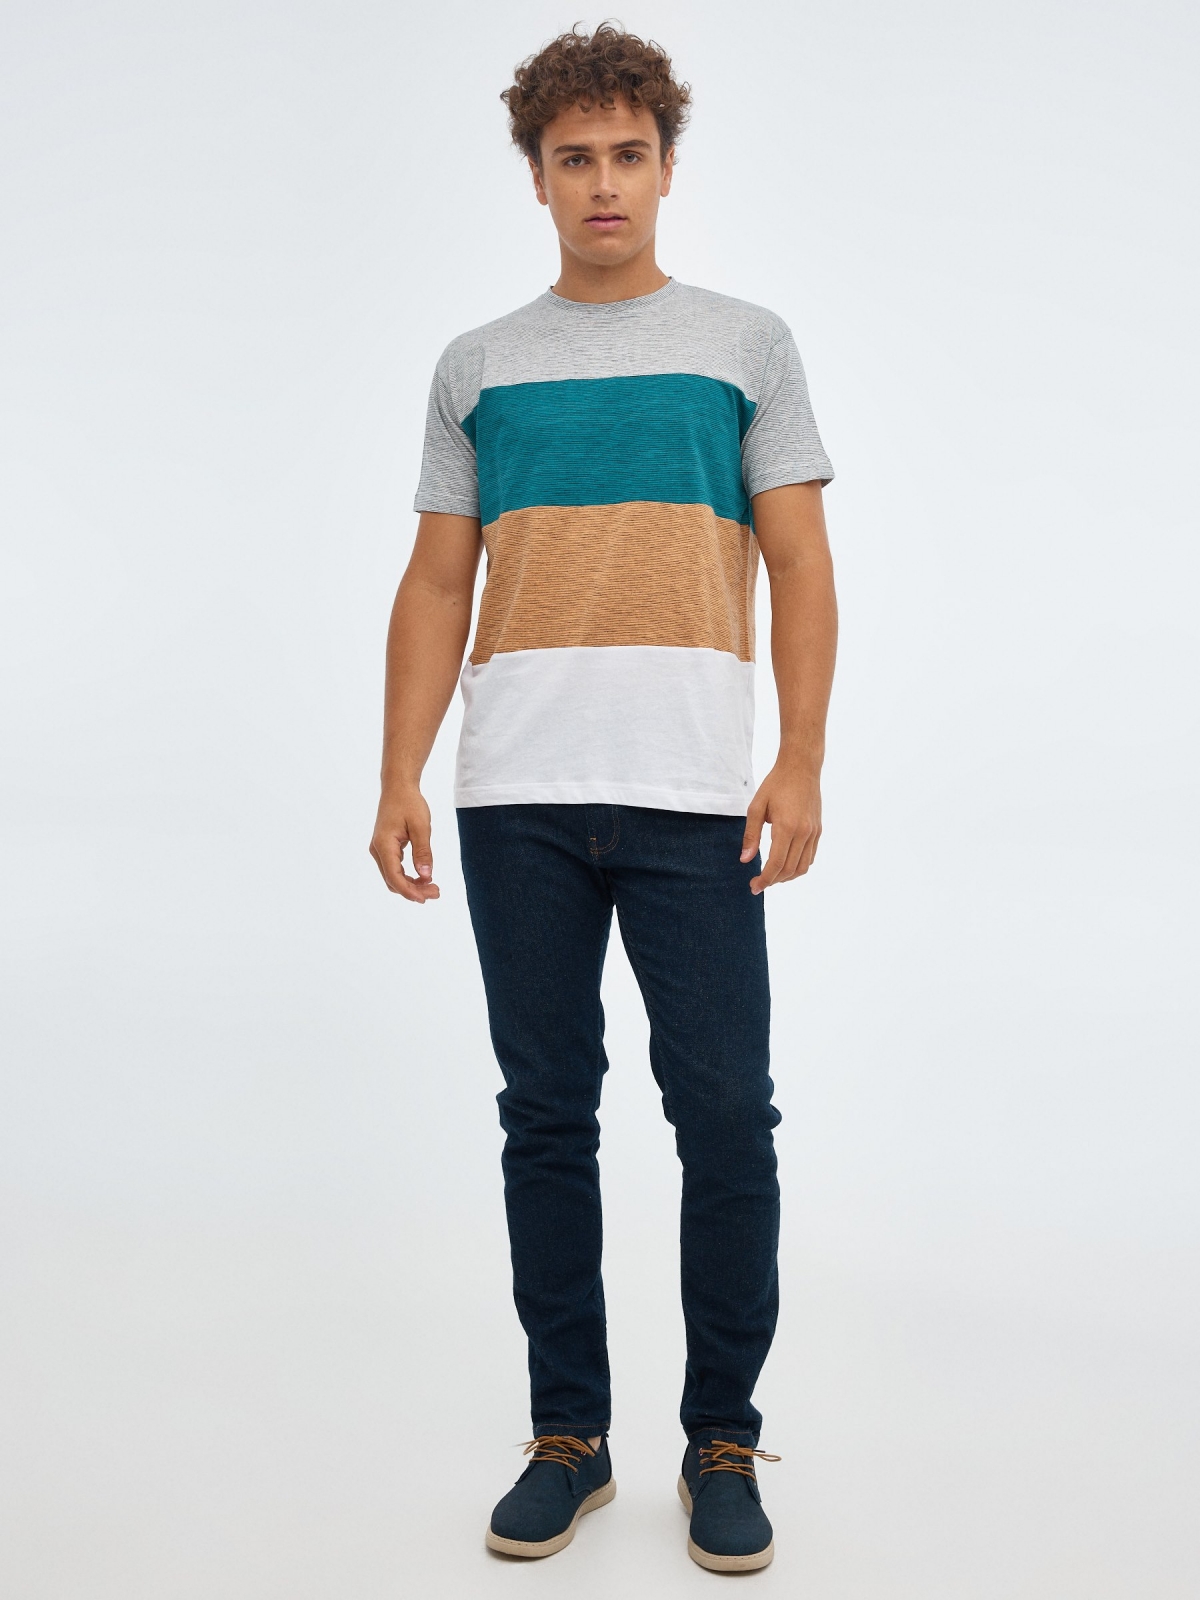 Block coloured striped T-shirt grey front view